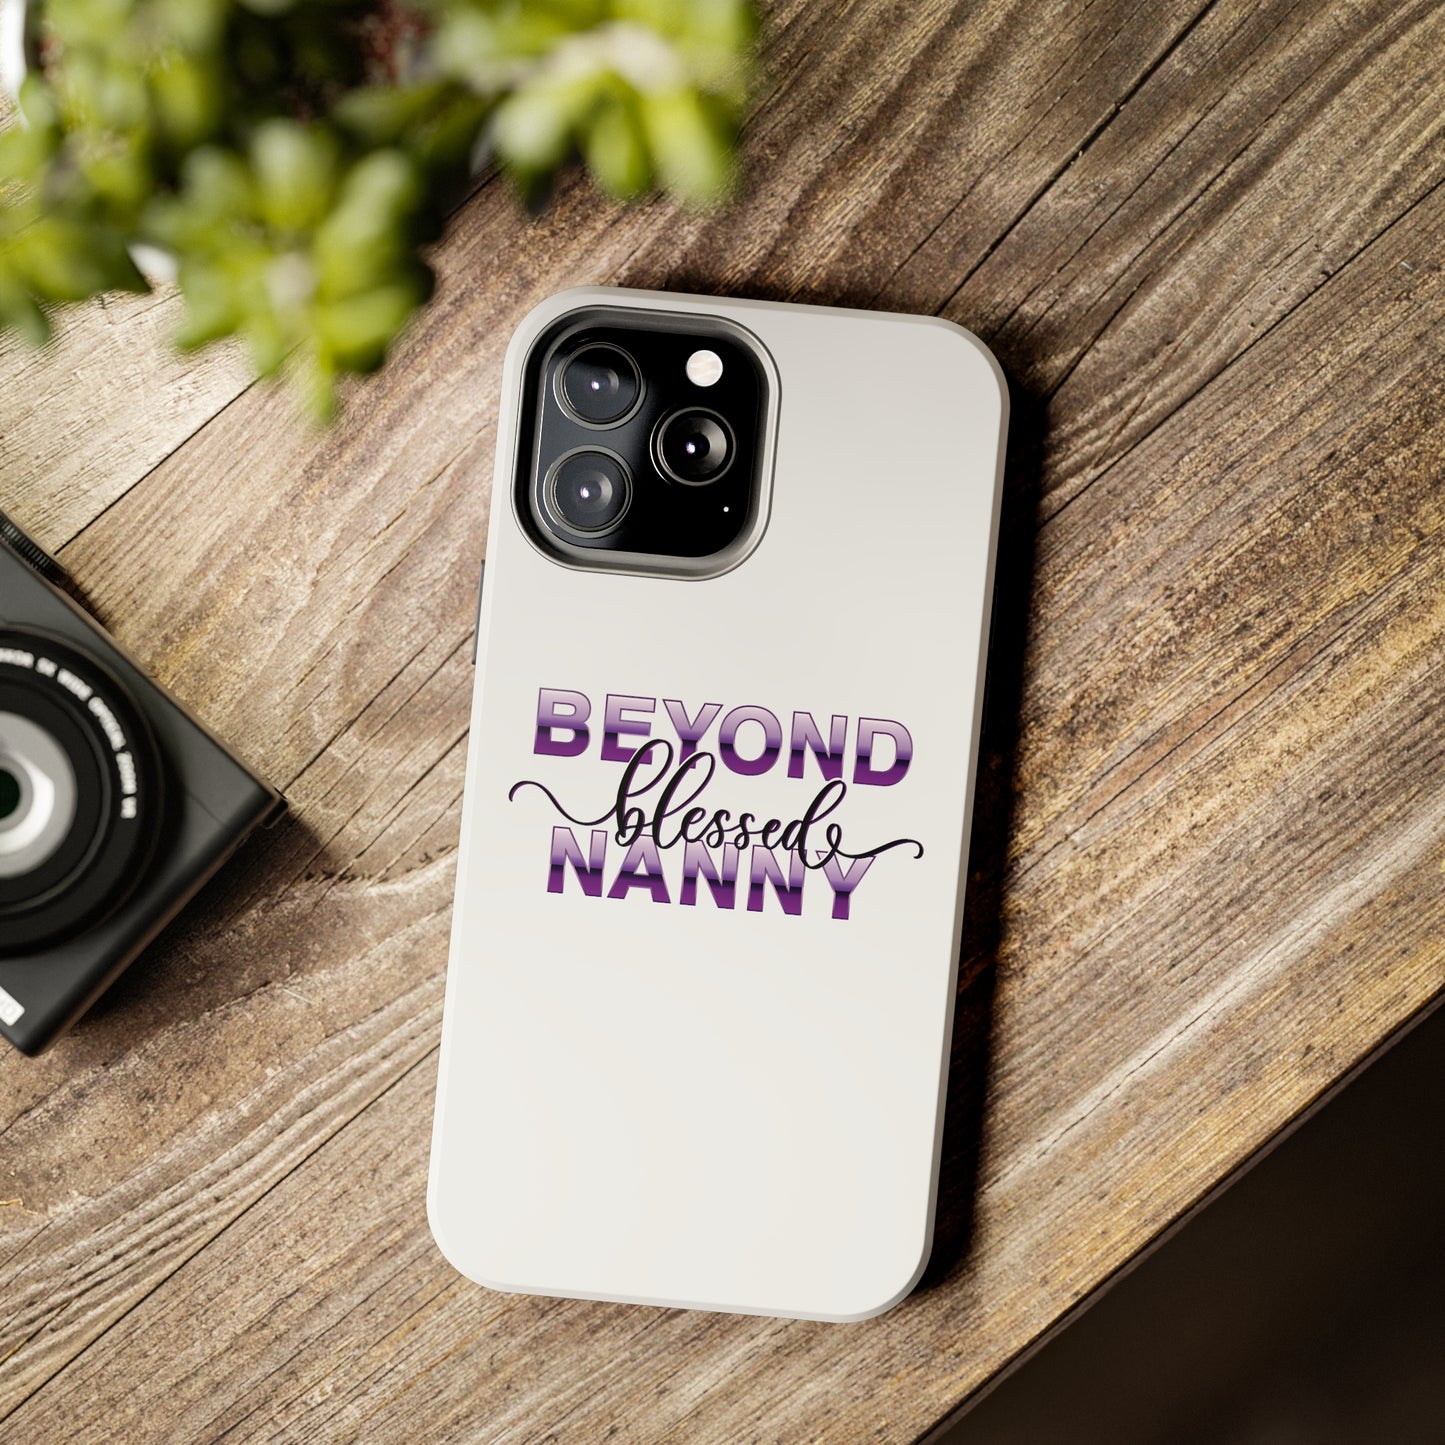 Beyond Blessed Nanny - Purple - Tough iPhone Cases